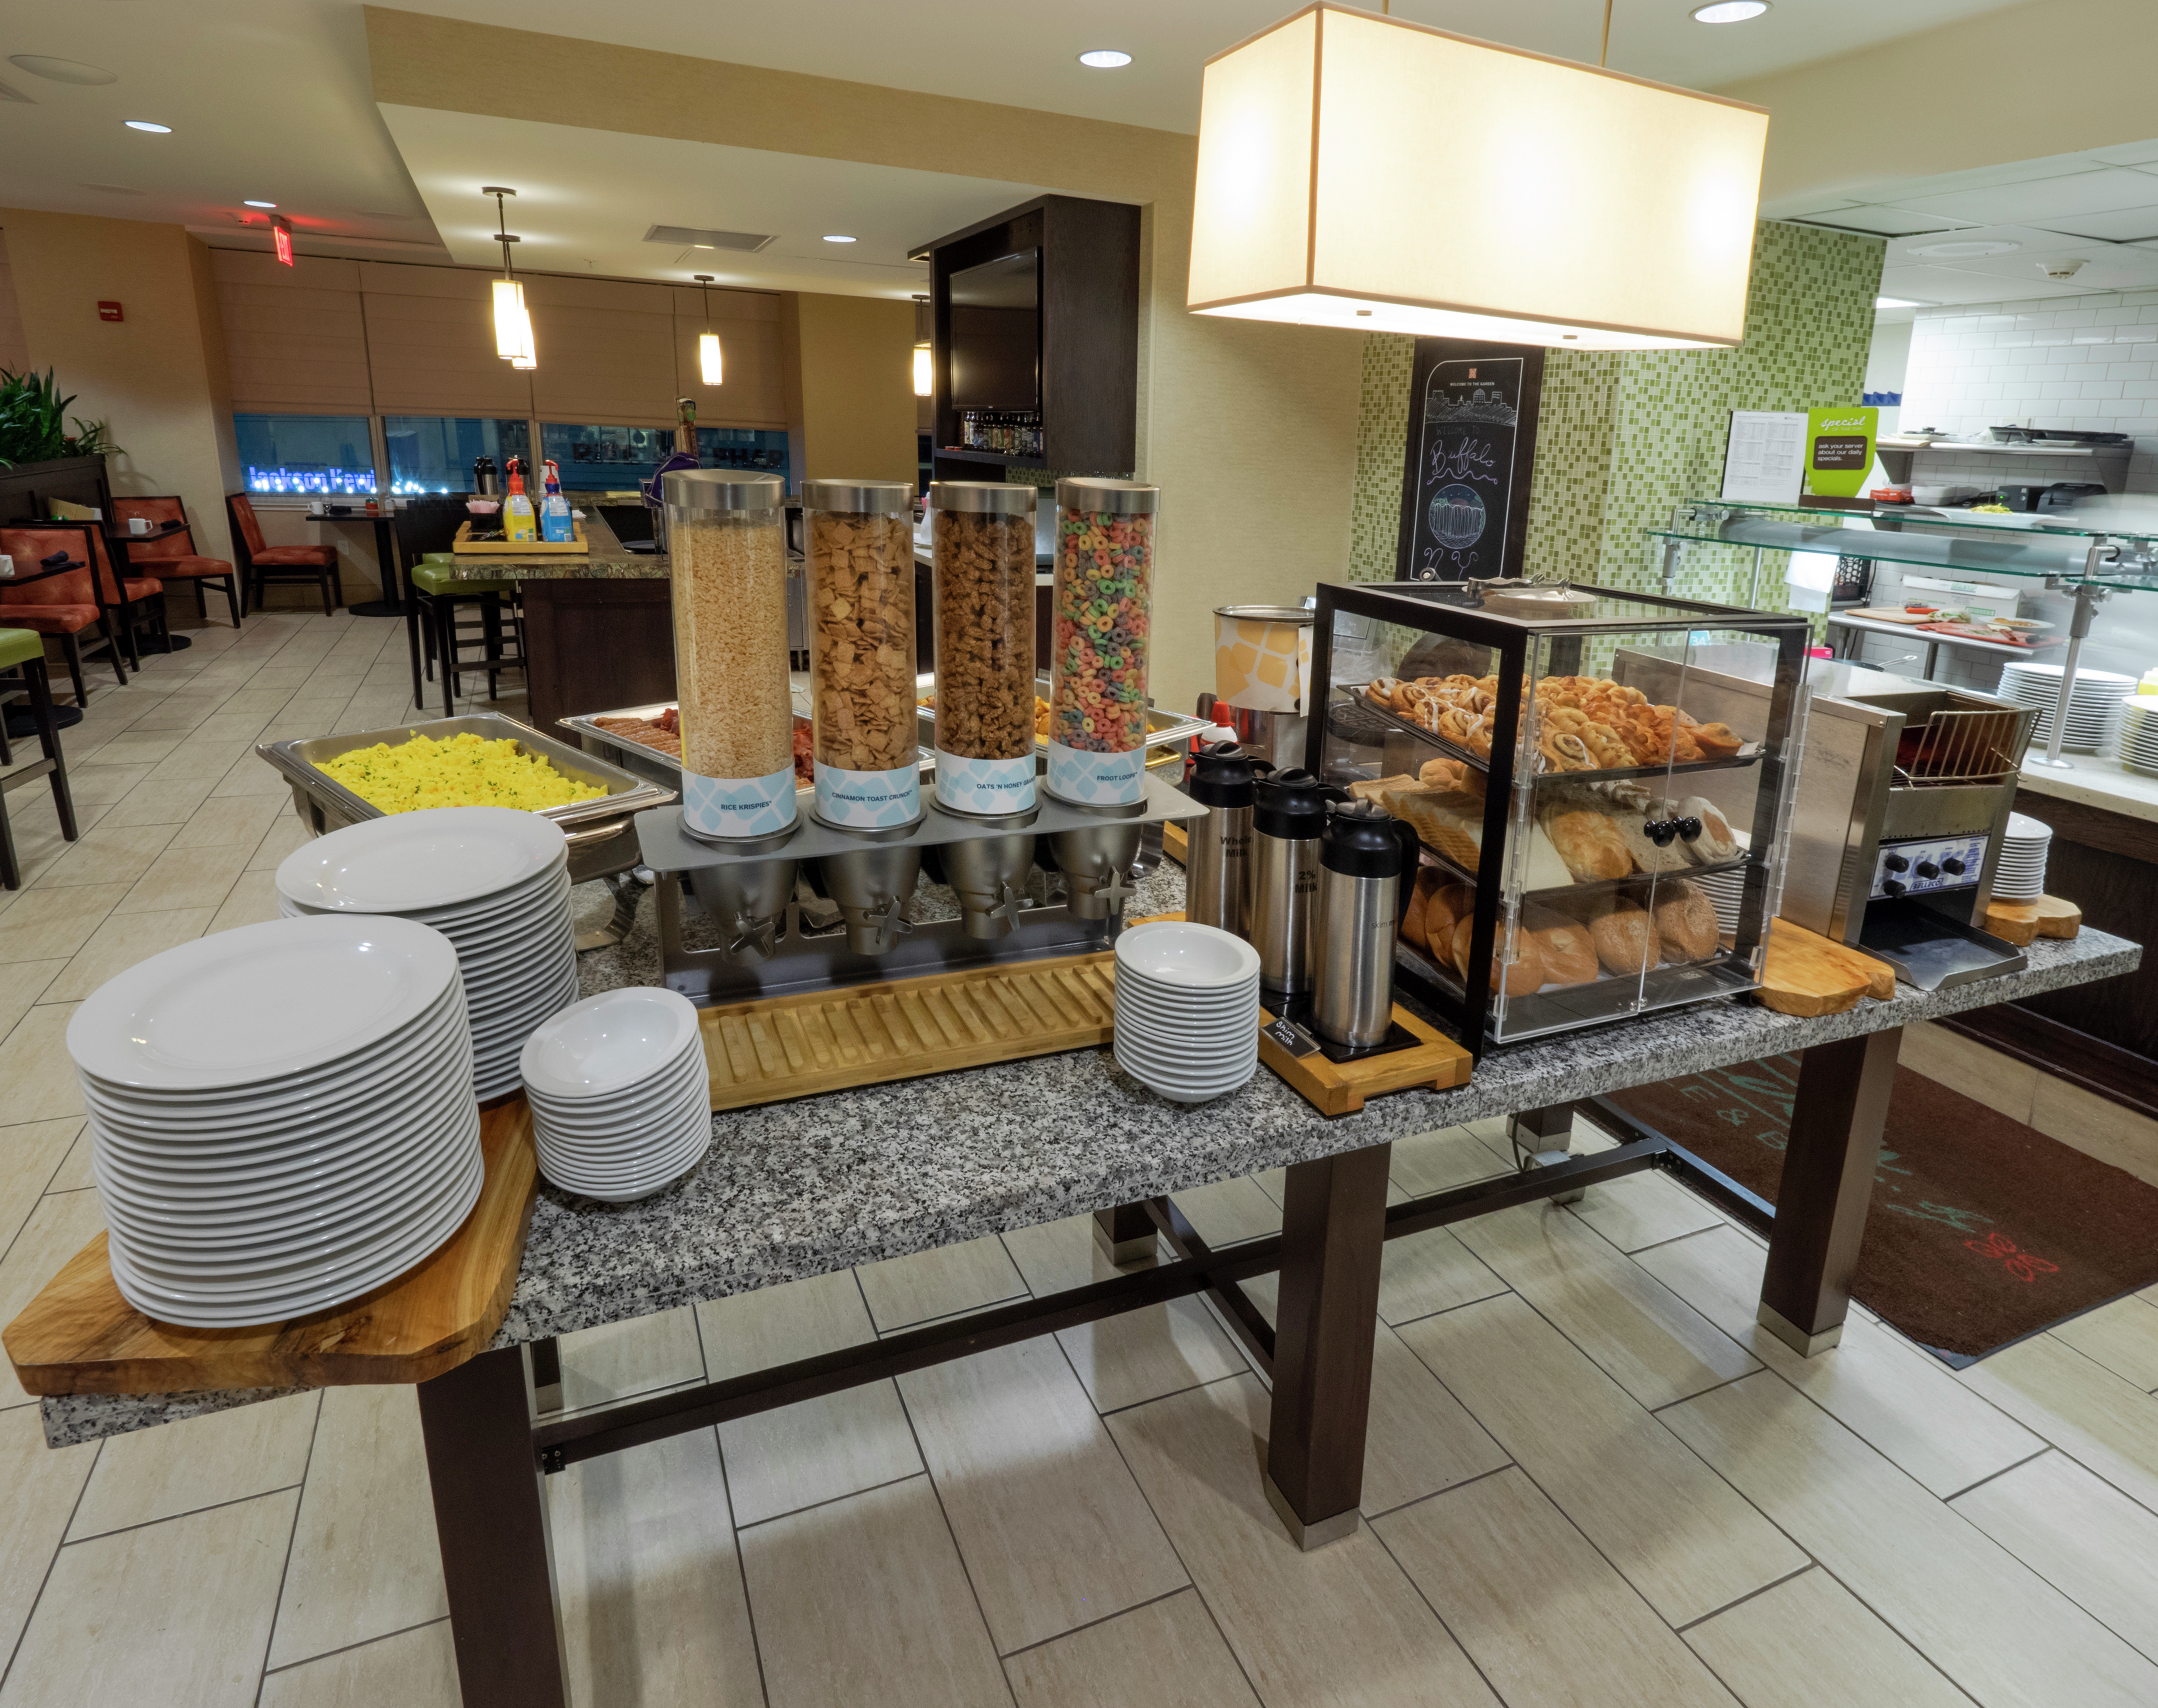 View of Breakfast Buffet Area with Cereals